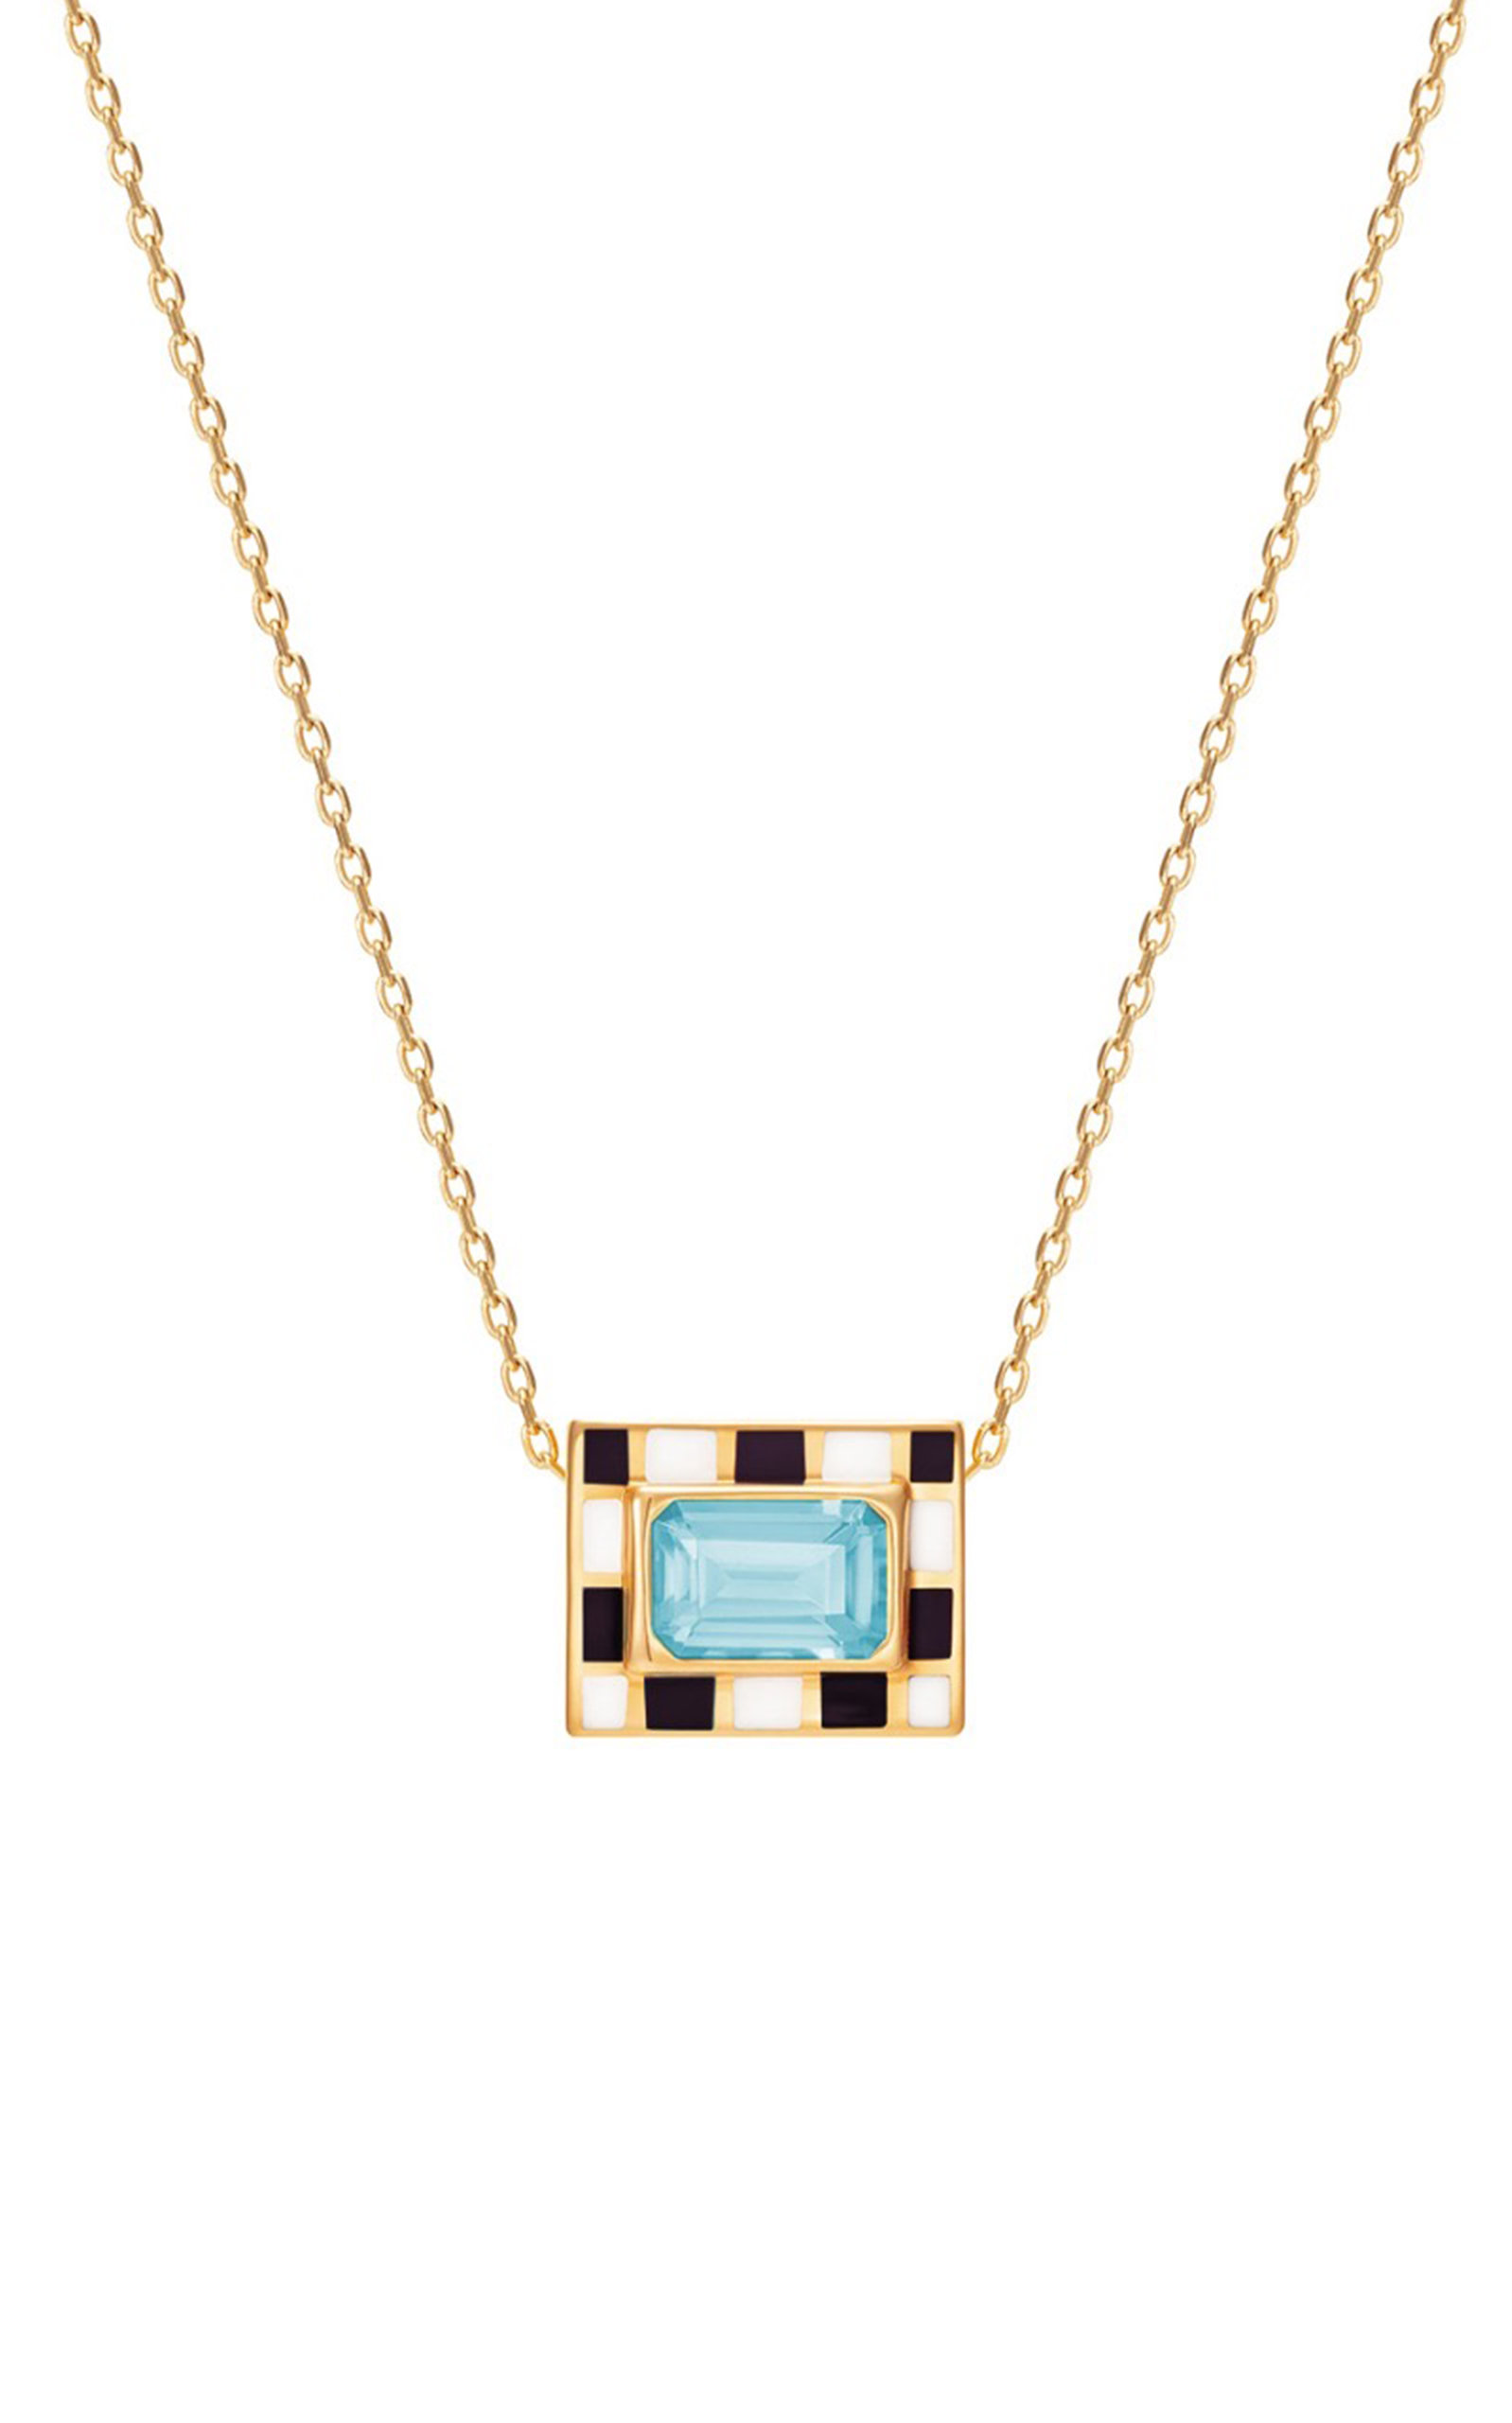 Let's Play Chess 14K Gold Topaz Necklace